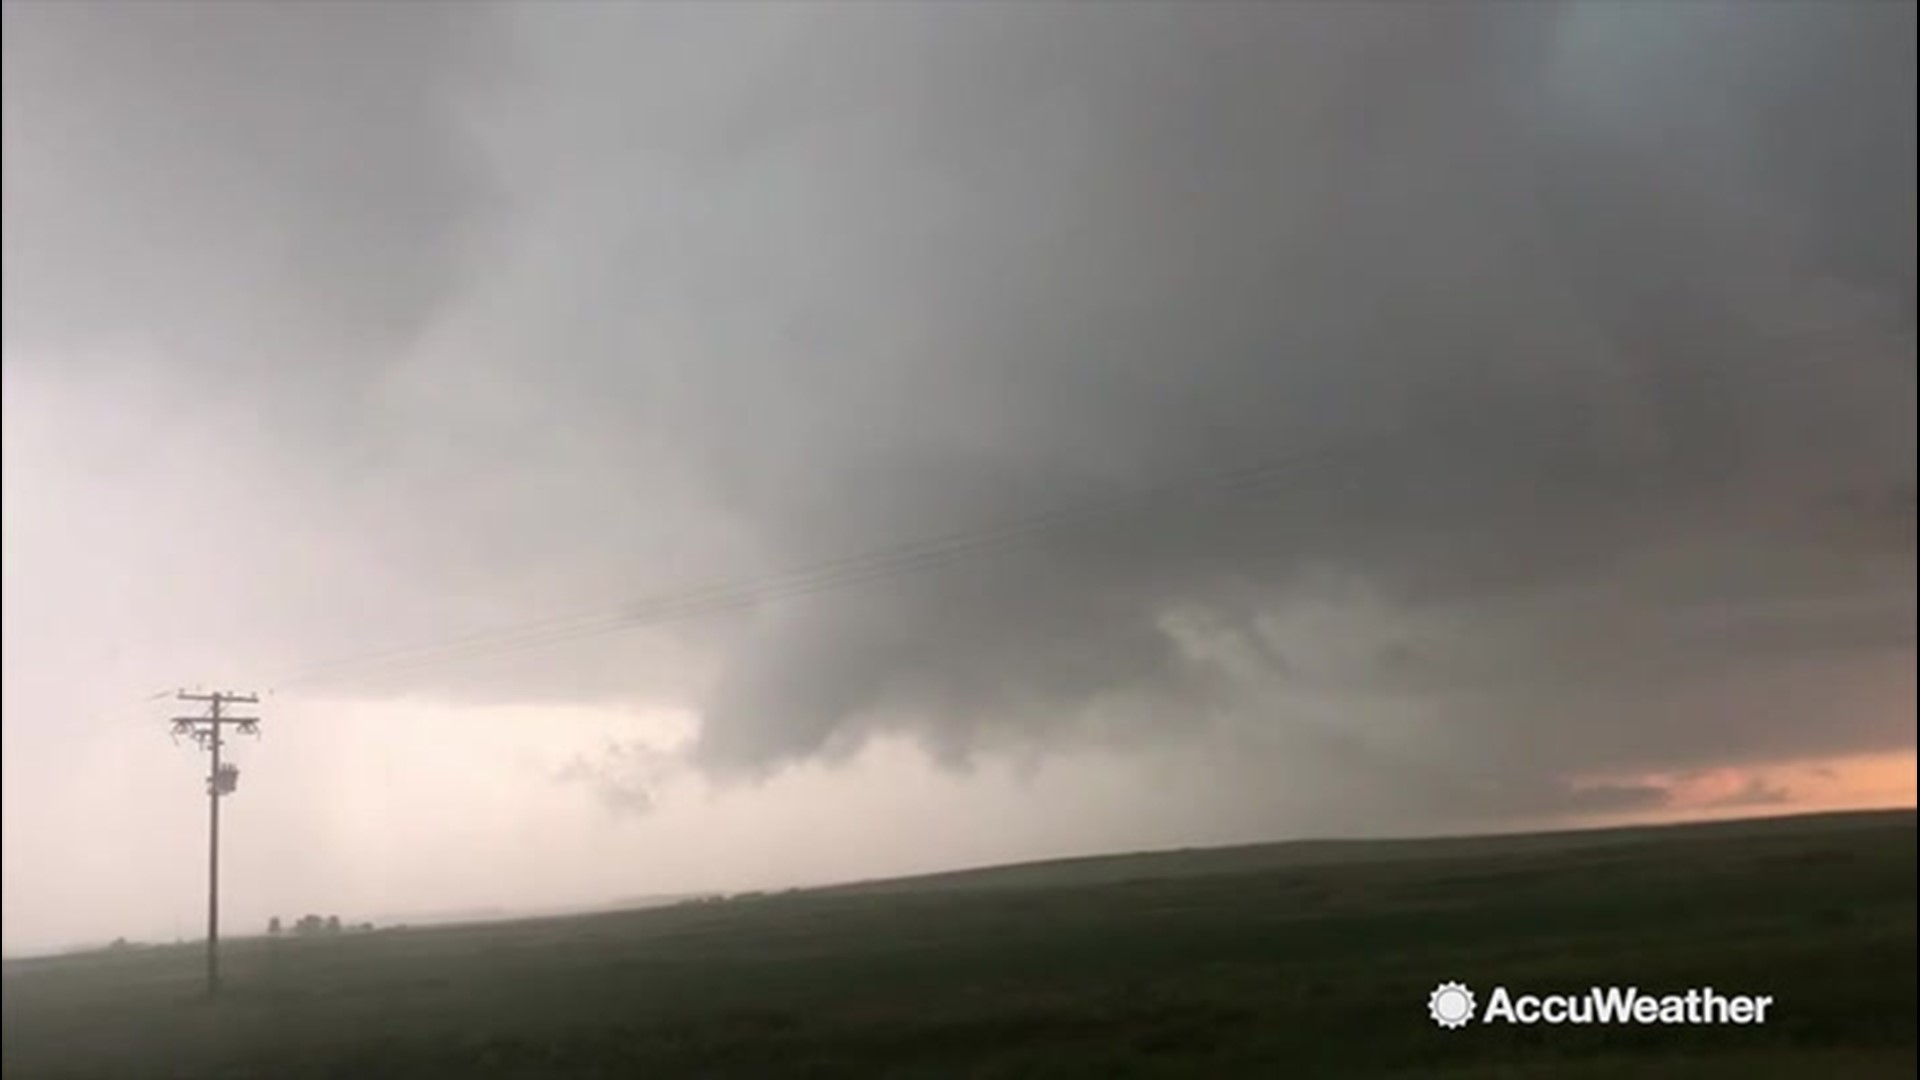 Assiniboia, Saskatchewan almost got quite the surprise when what could have been a tornado started to form, on June 28. The wall cloud  began to rotate, creating a slight funnel that never actually touched down.